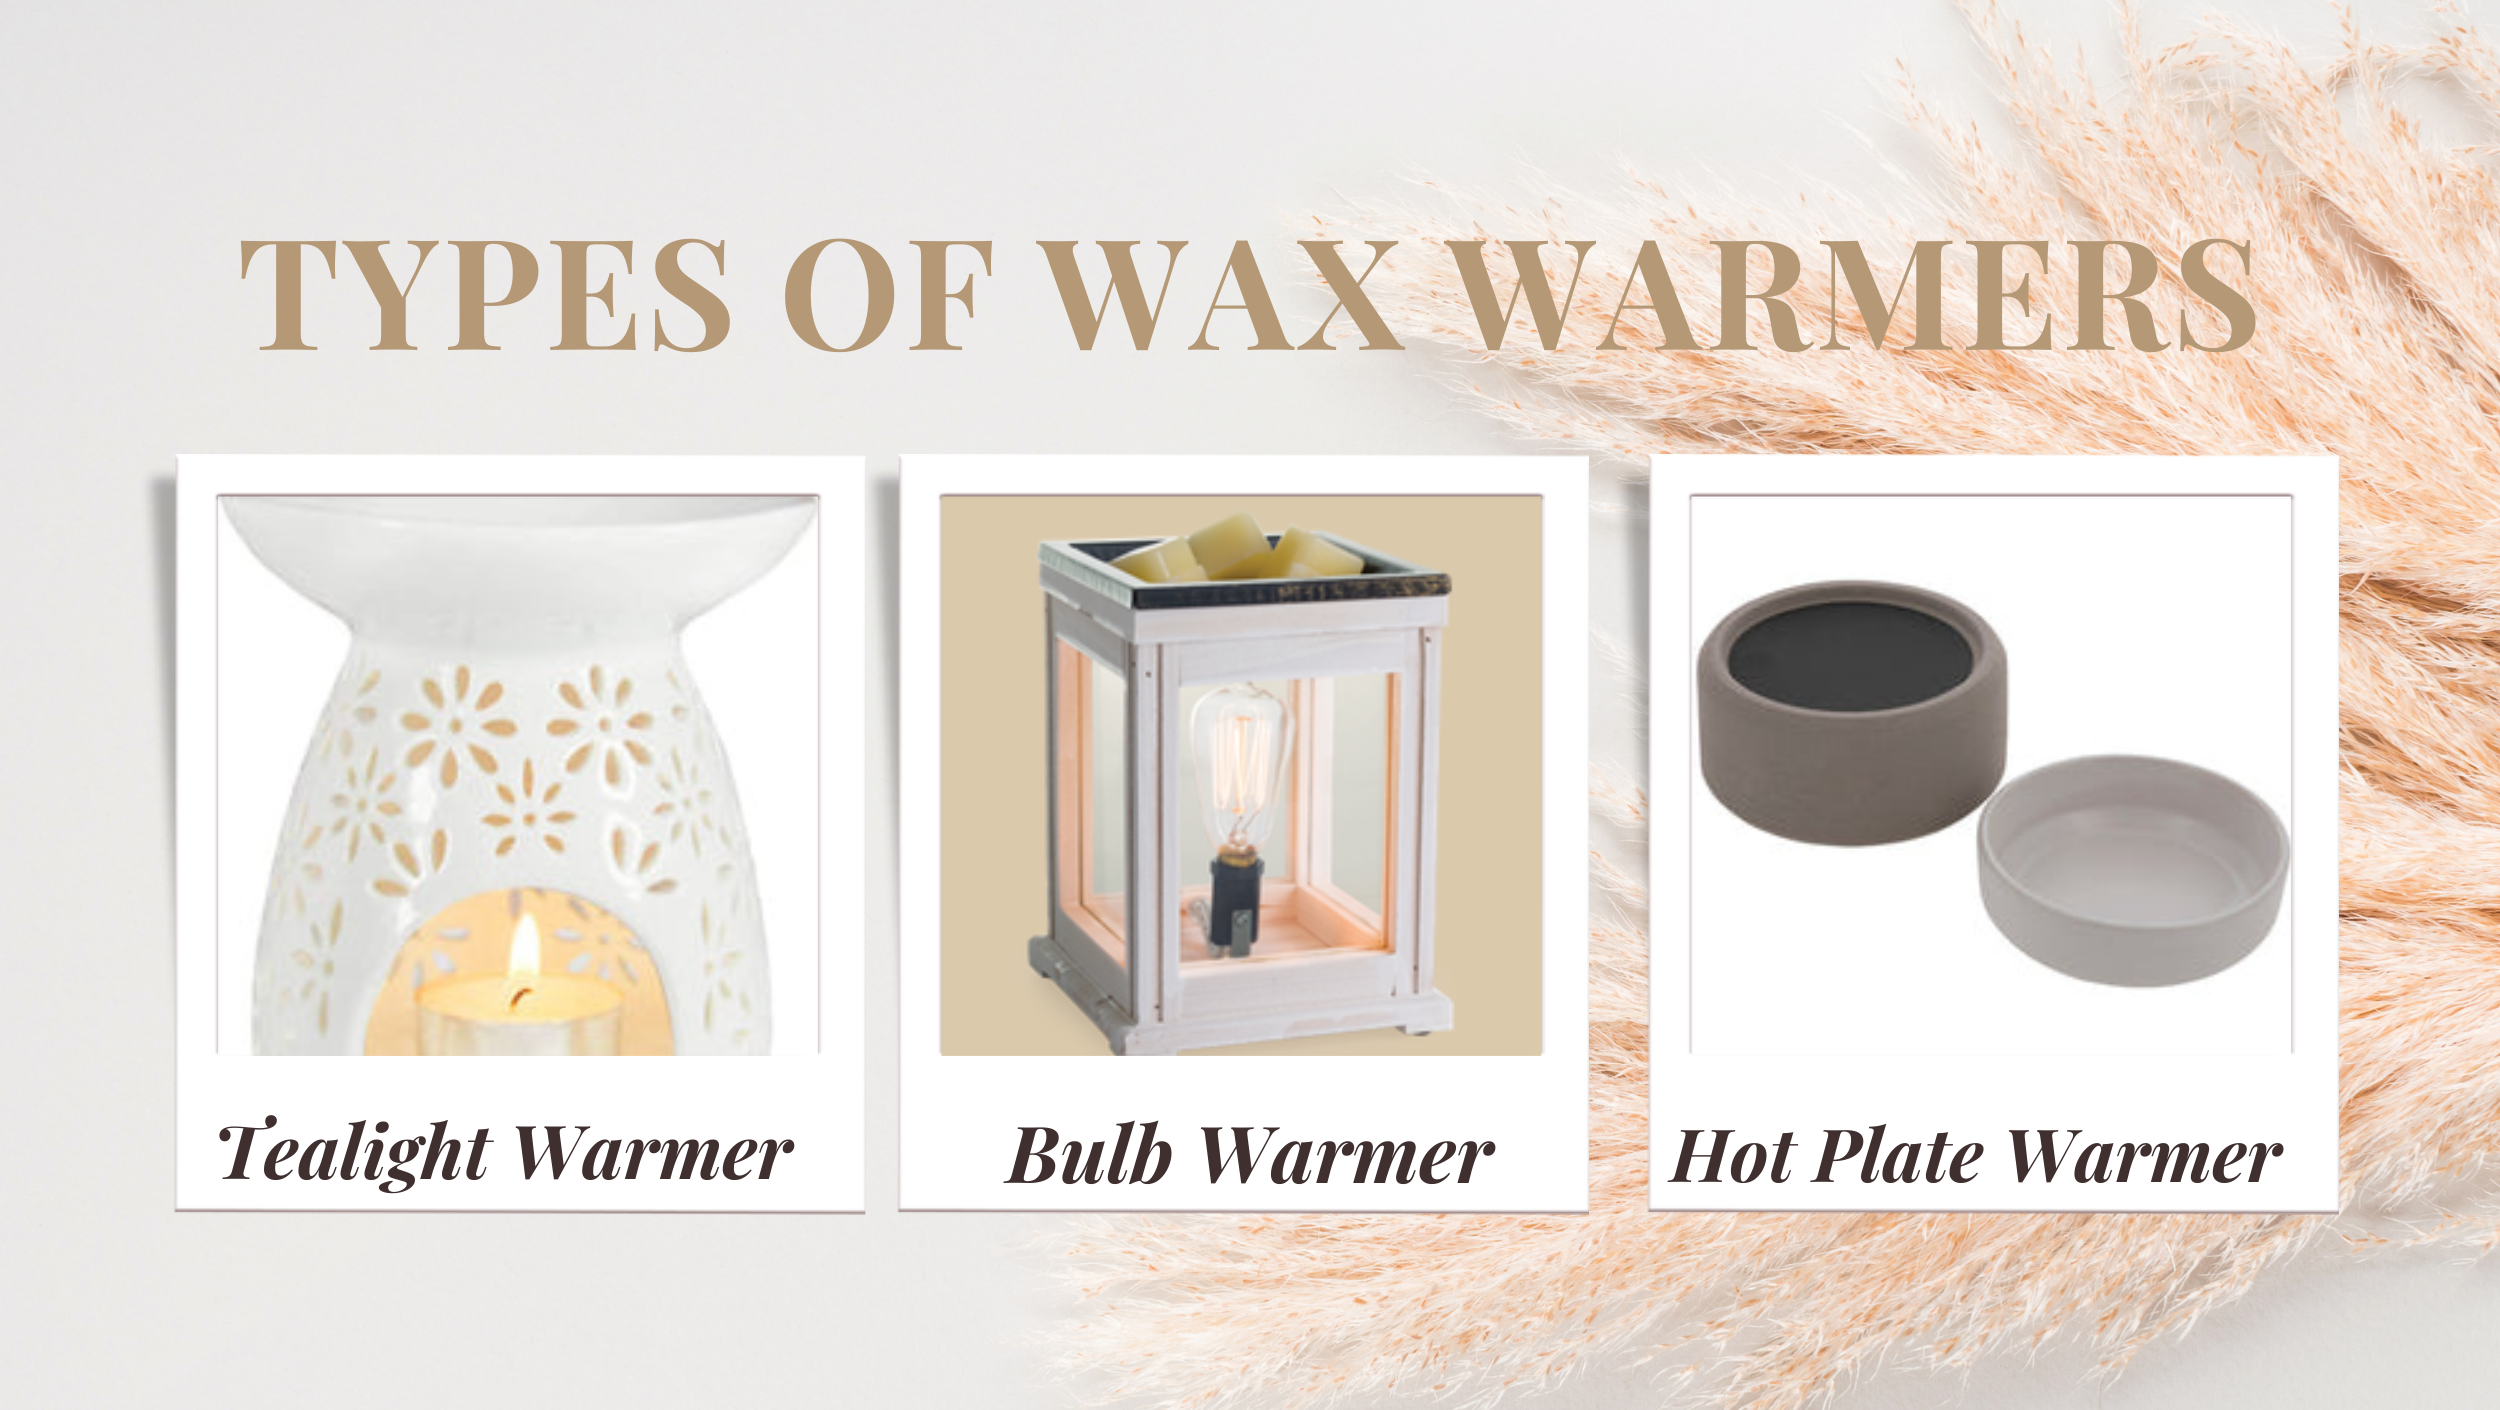 Different types of wax melt warmers may affect the scent throw. We've tested 3 different style warmers with our melts and wanted to share some key points along with our observations below.